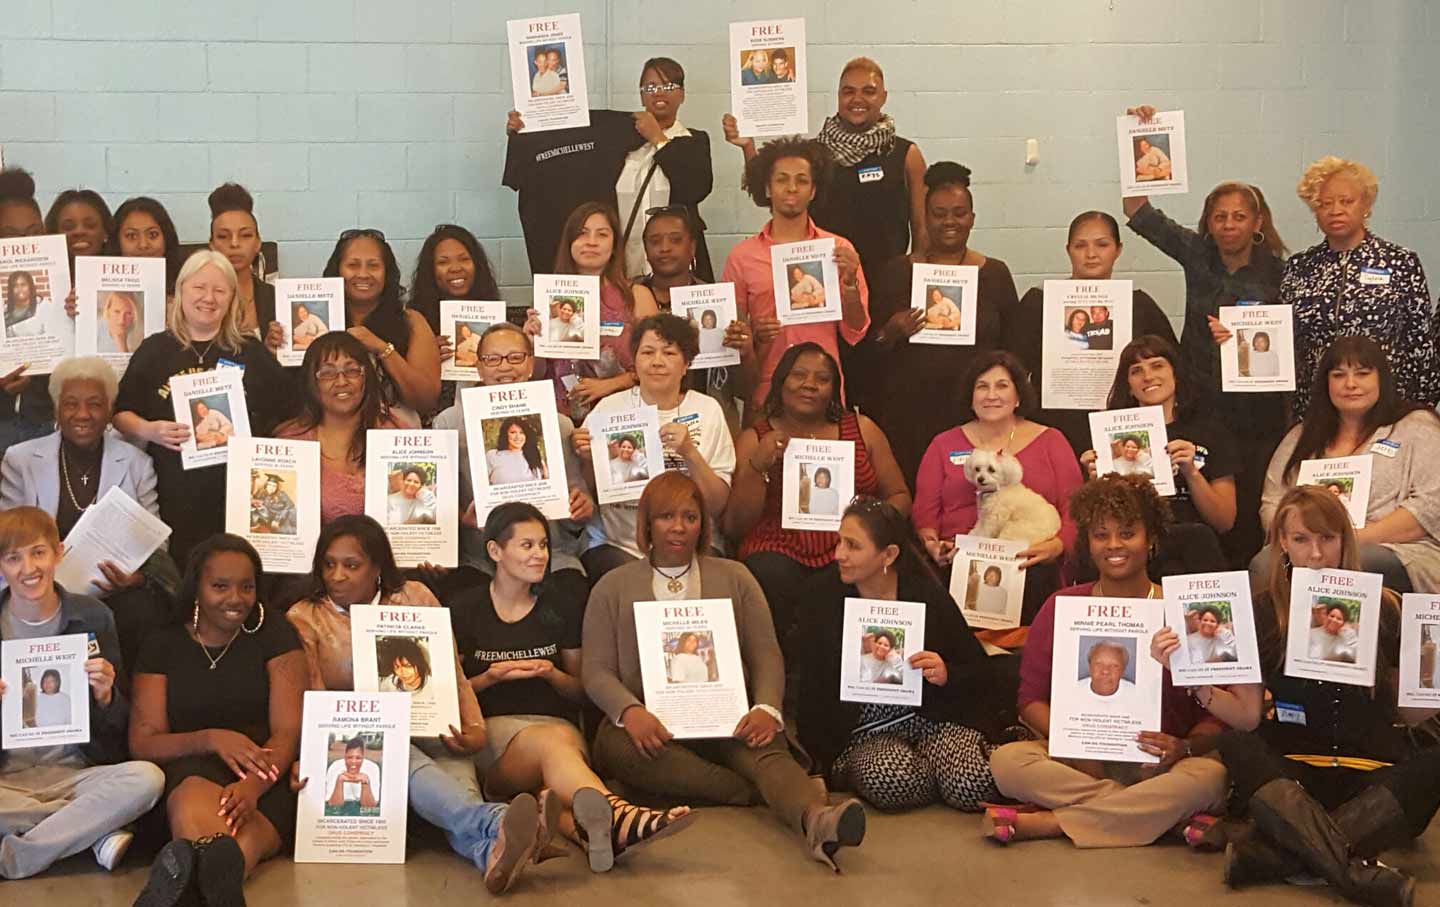 National Council for Incarcerated and Formerly Incarcerated Women and Girls